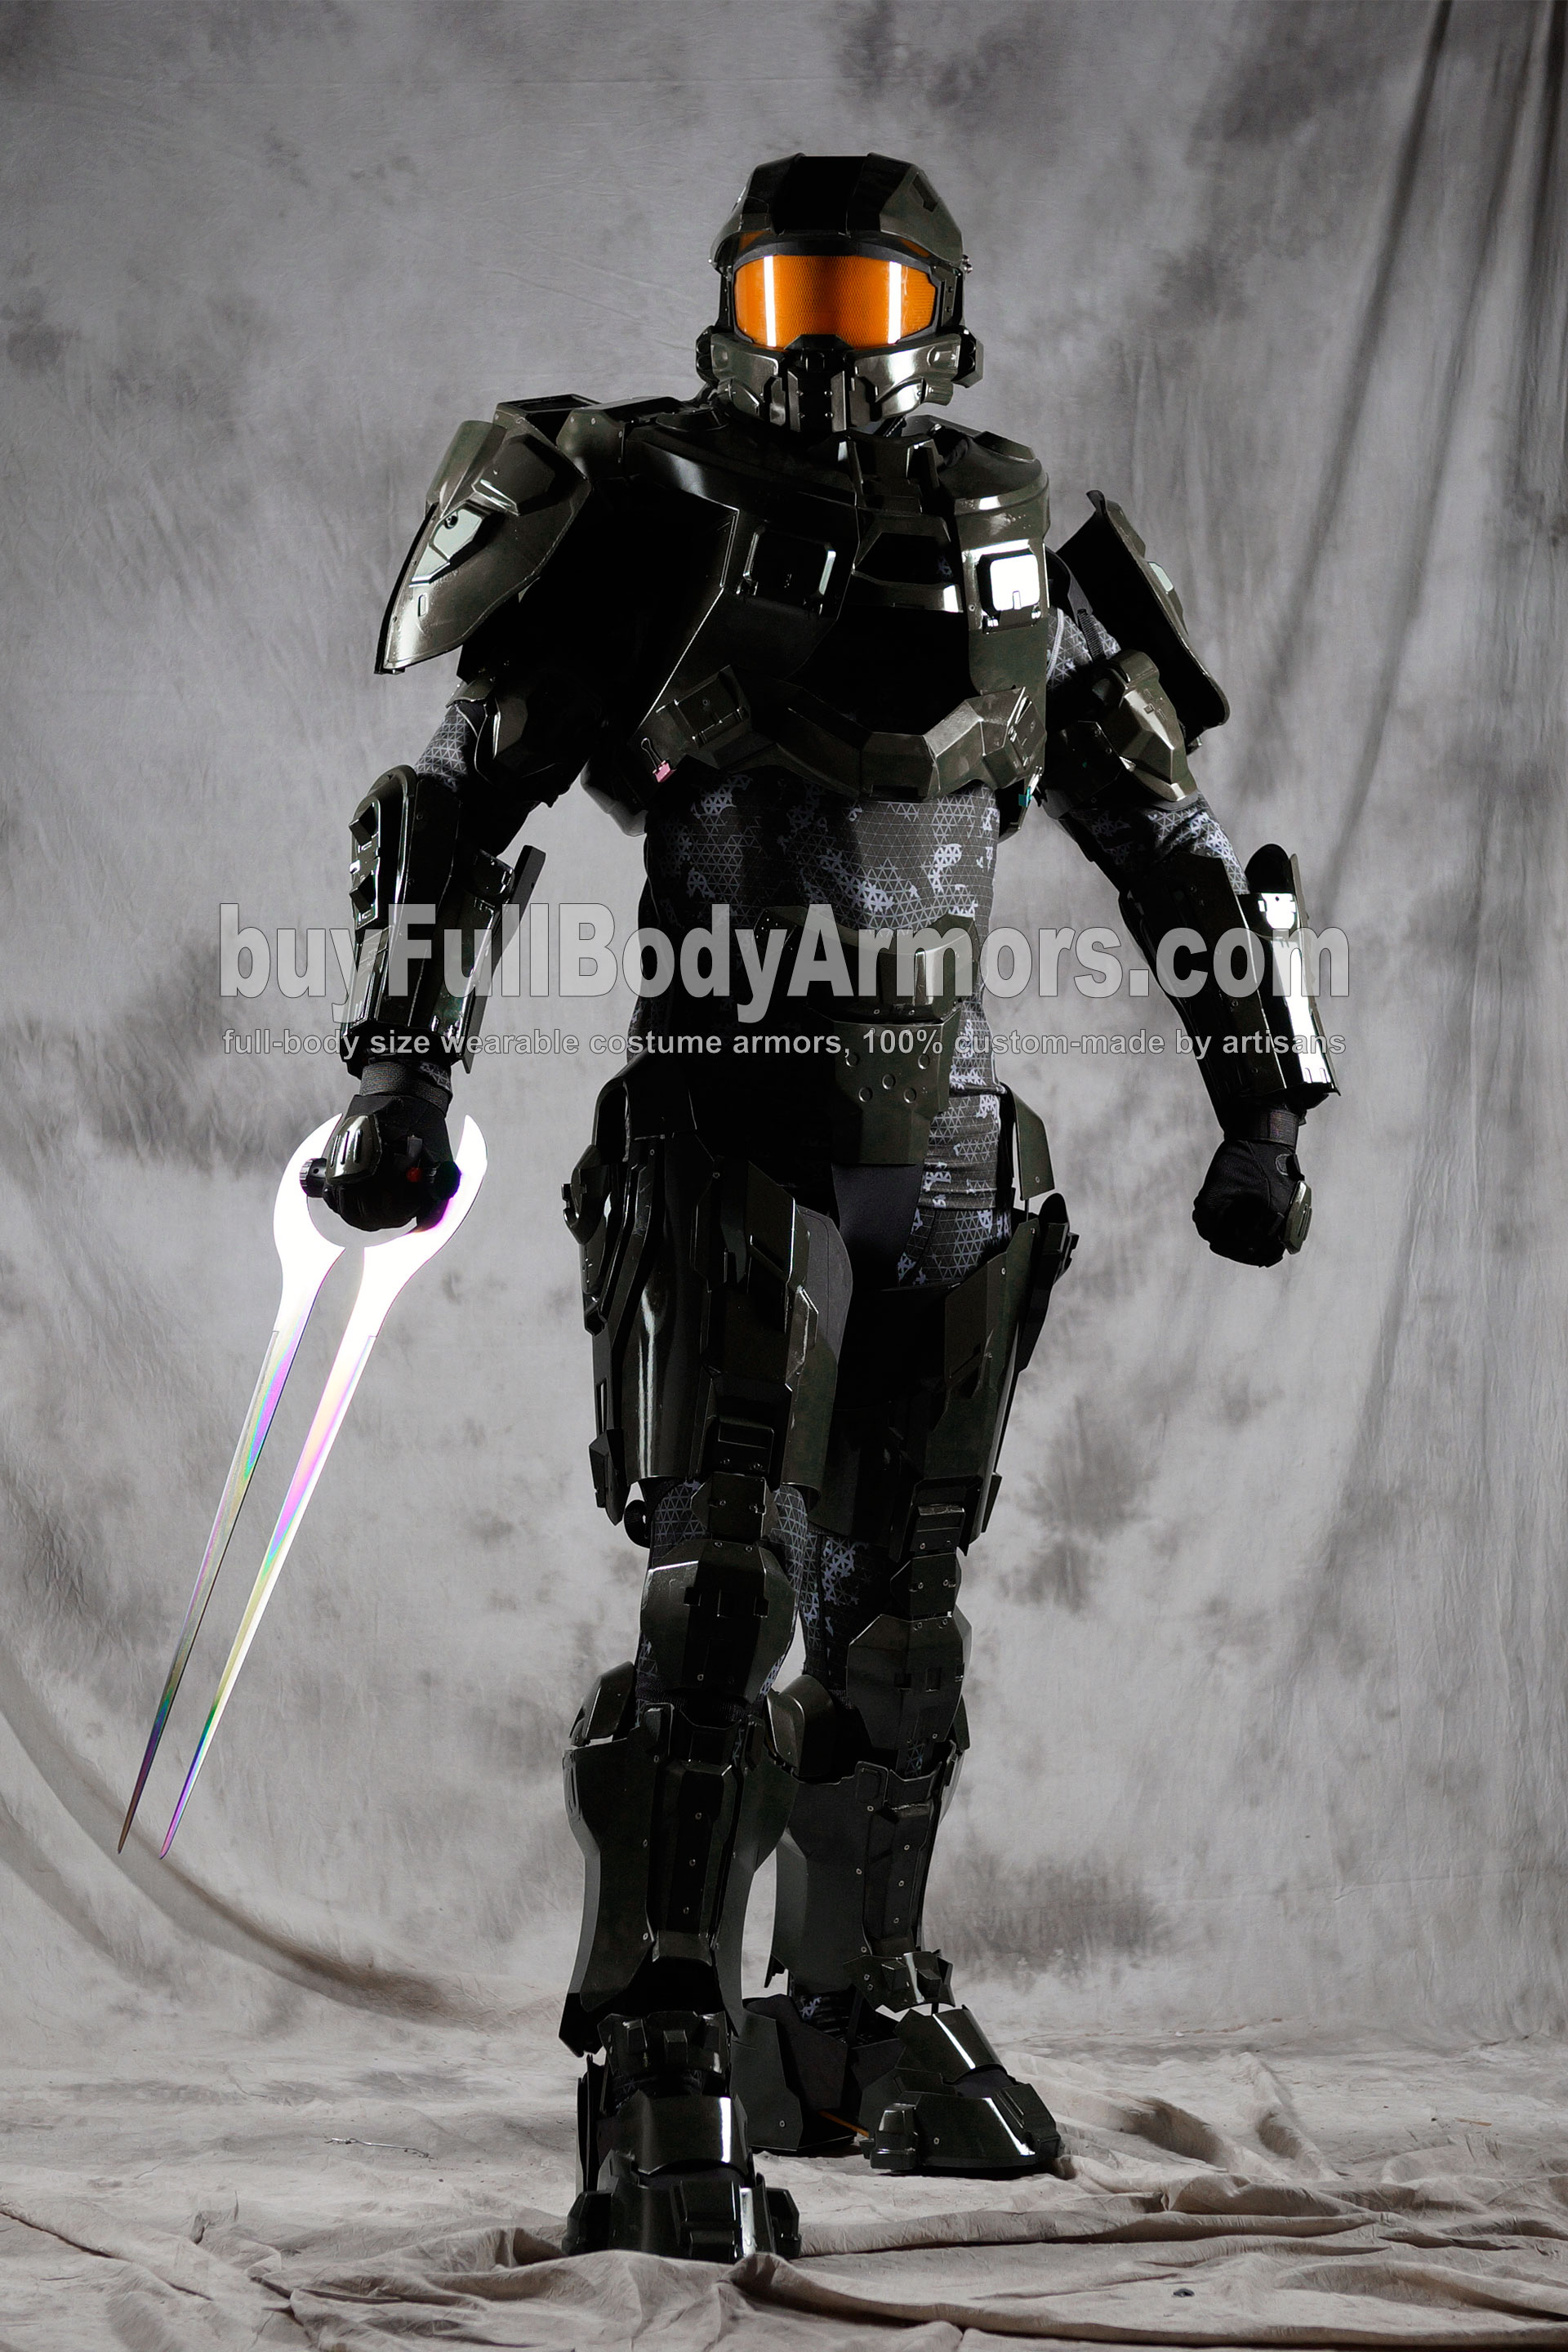 Wearable Halo 5 Master Chief Armor Suit Costume 3